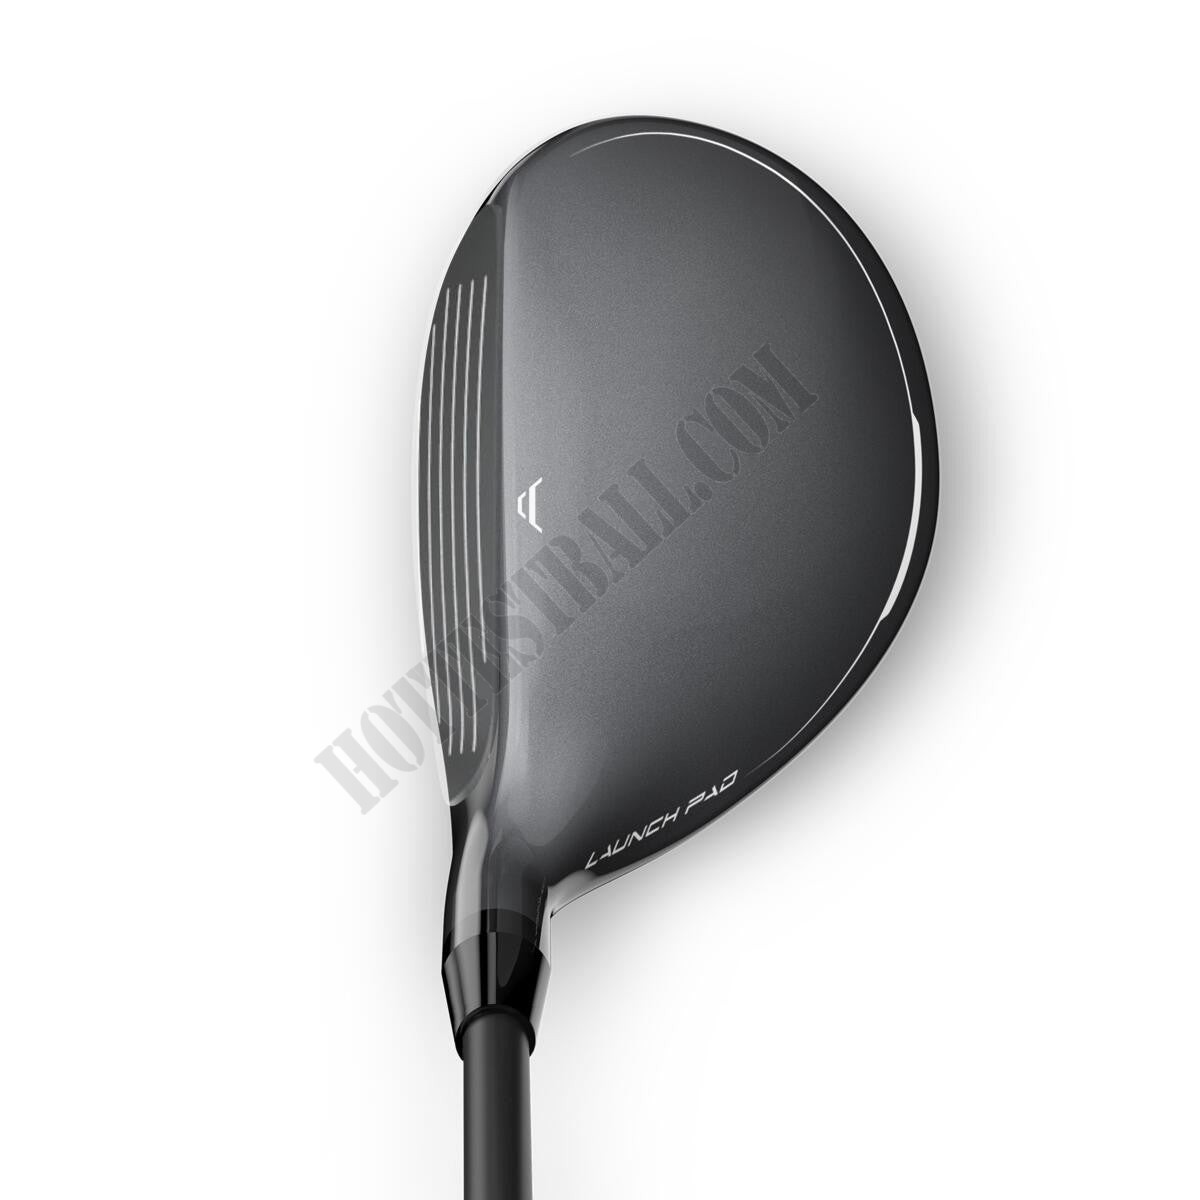 Launch Pad FY Club Hybrids - Wilson Discount Store - -1